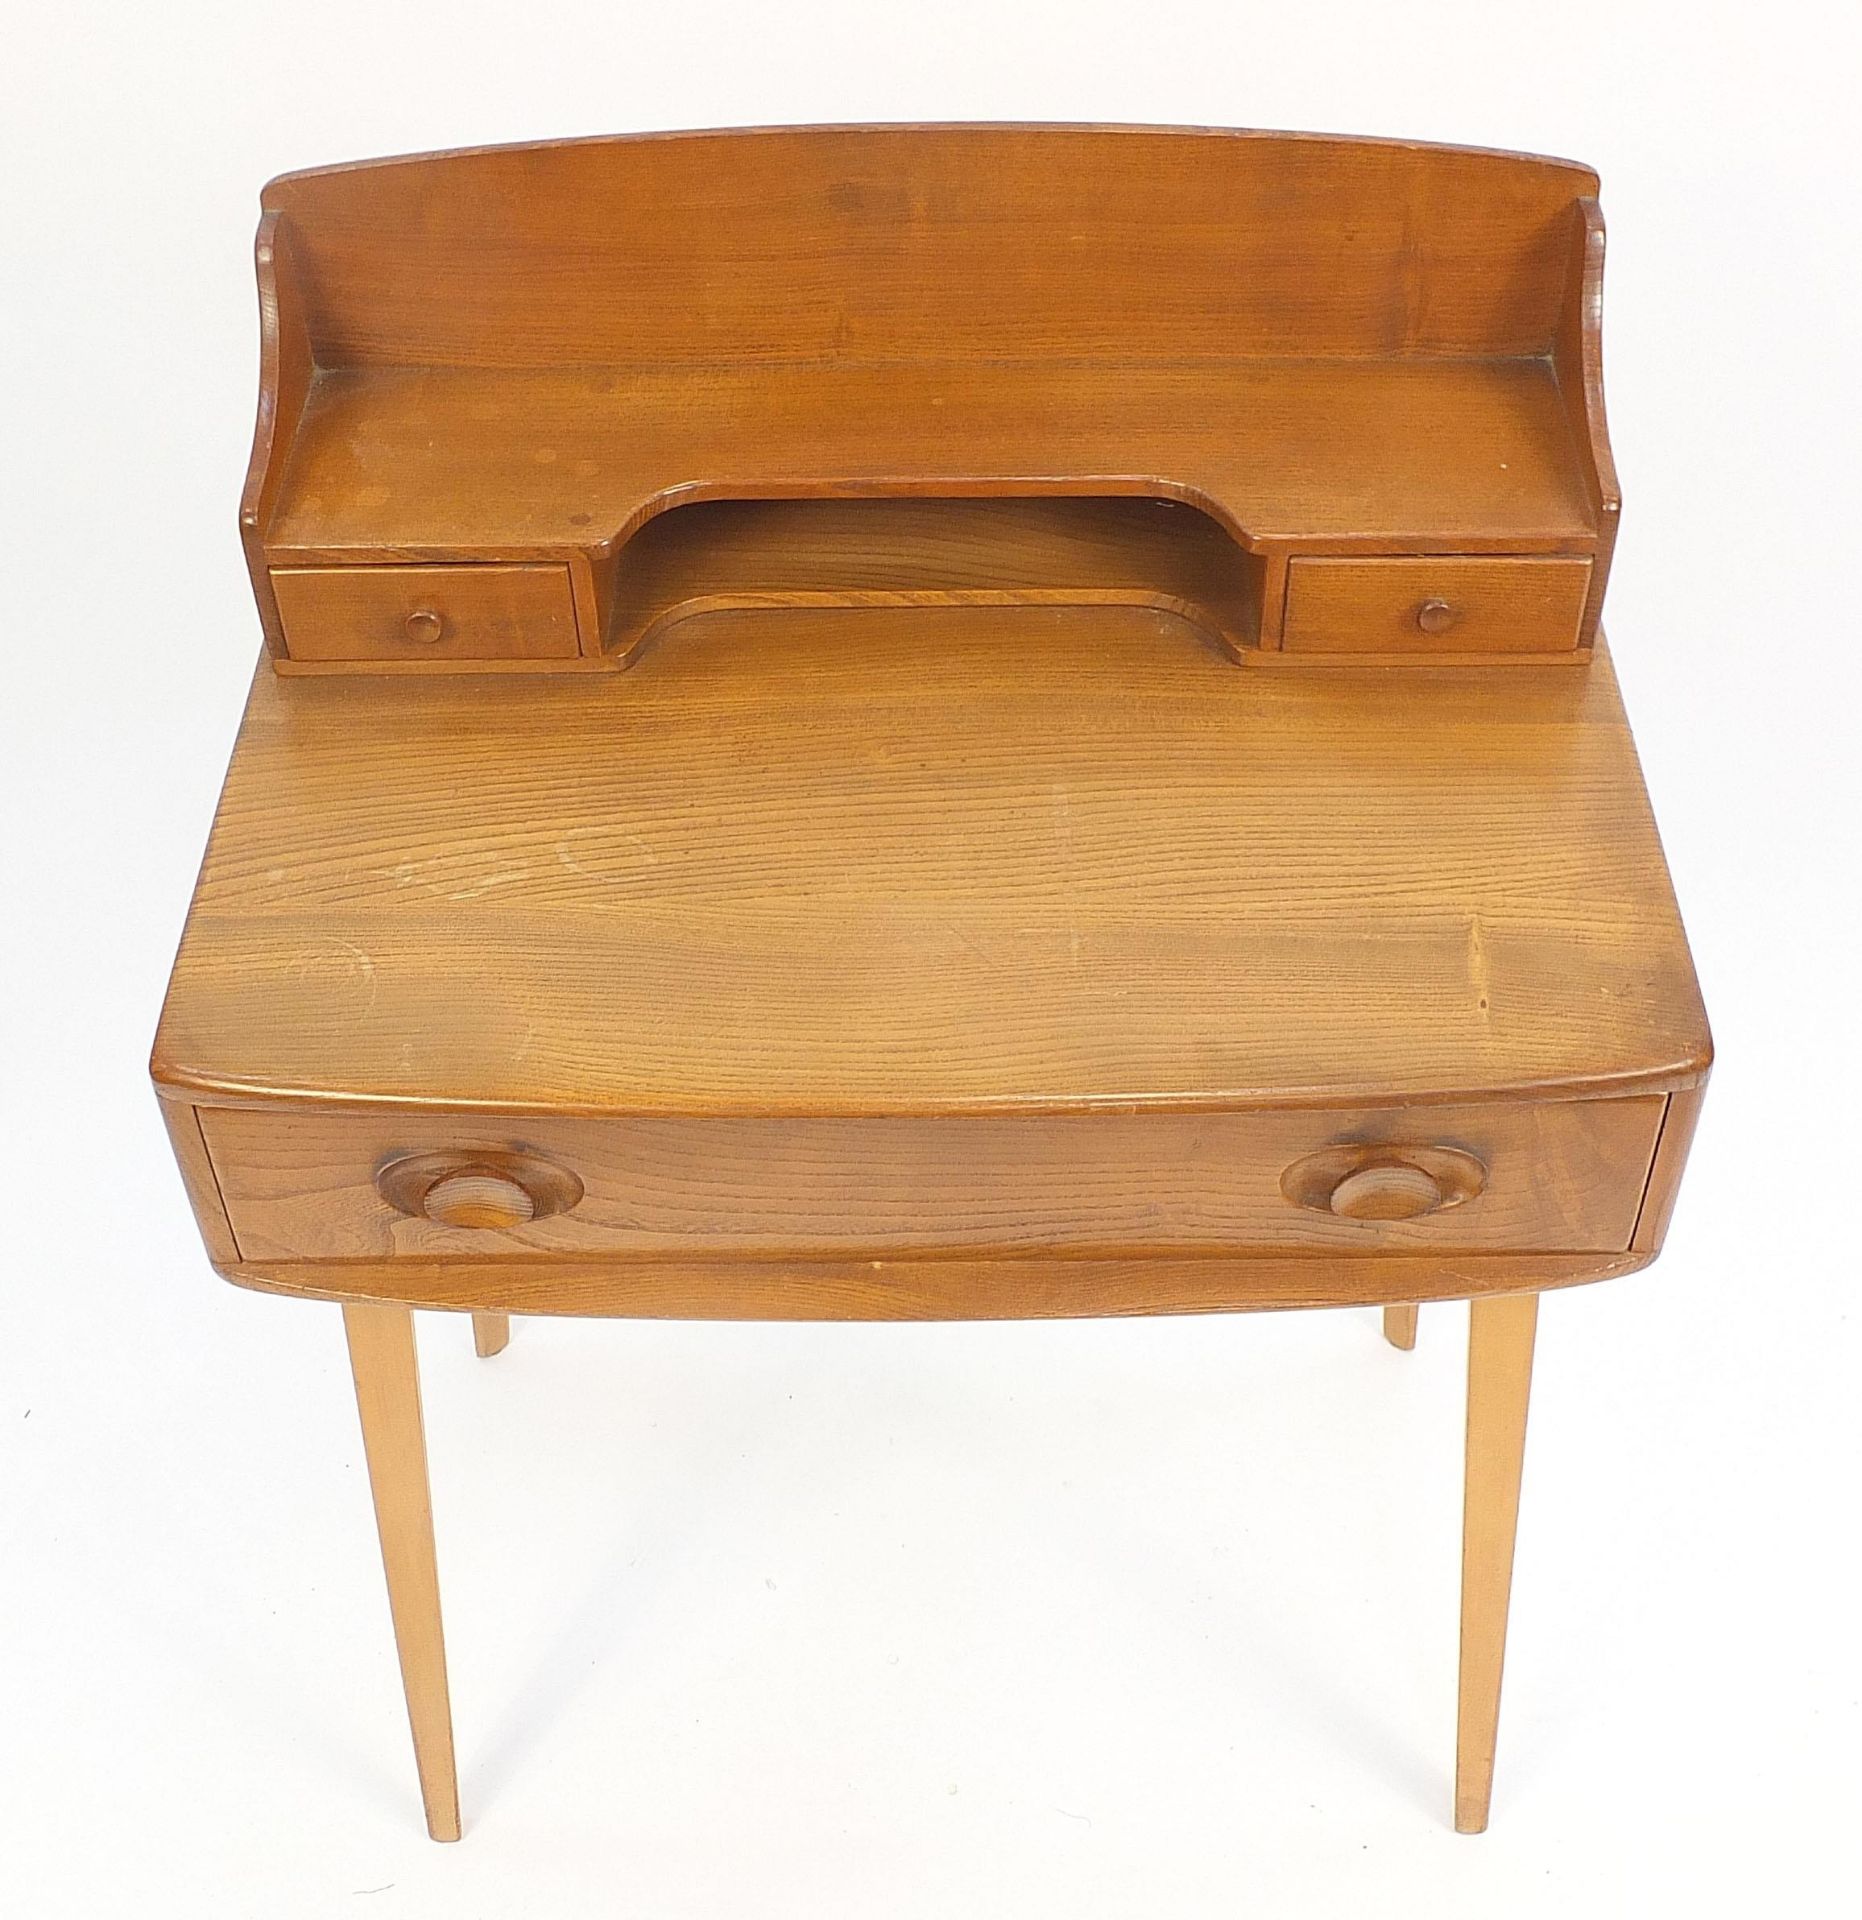 Ercol light elm dressing table with three drawers, 93cm H x 68.5cm W x 48cm D - Image 3 of 6